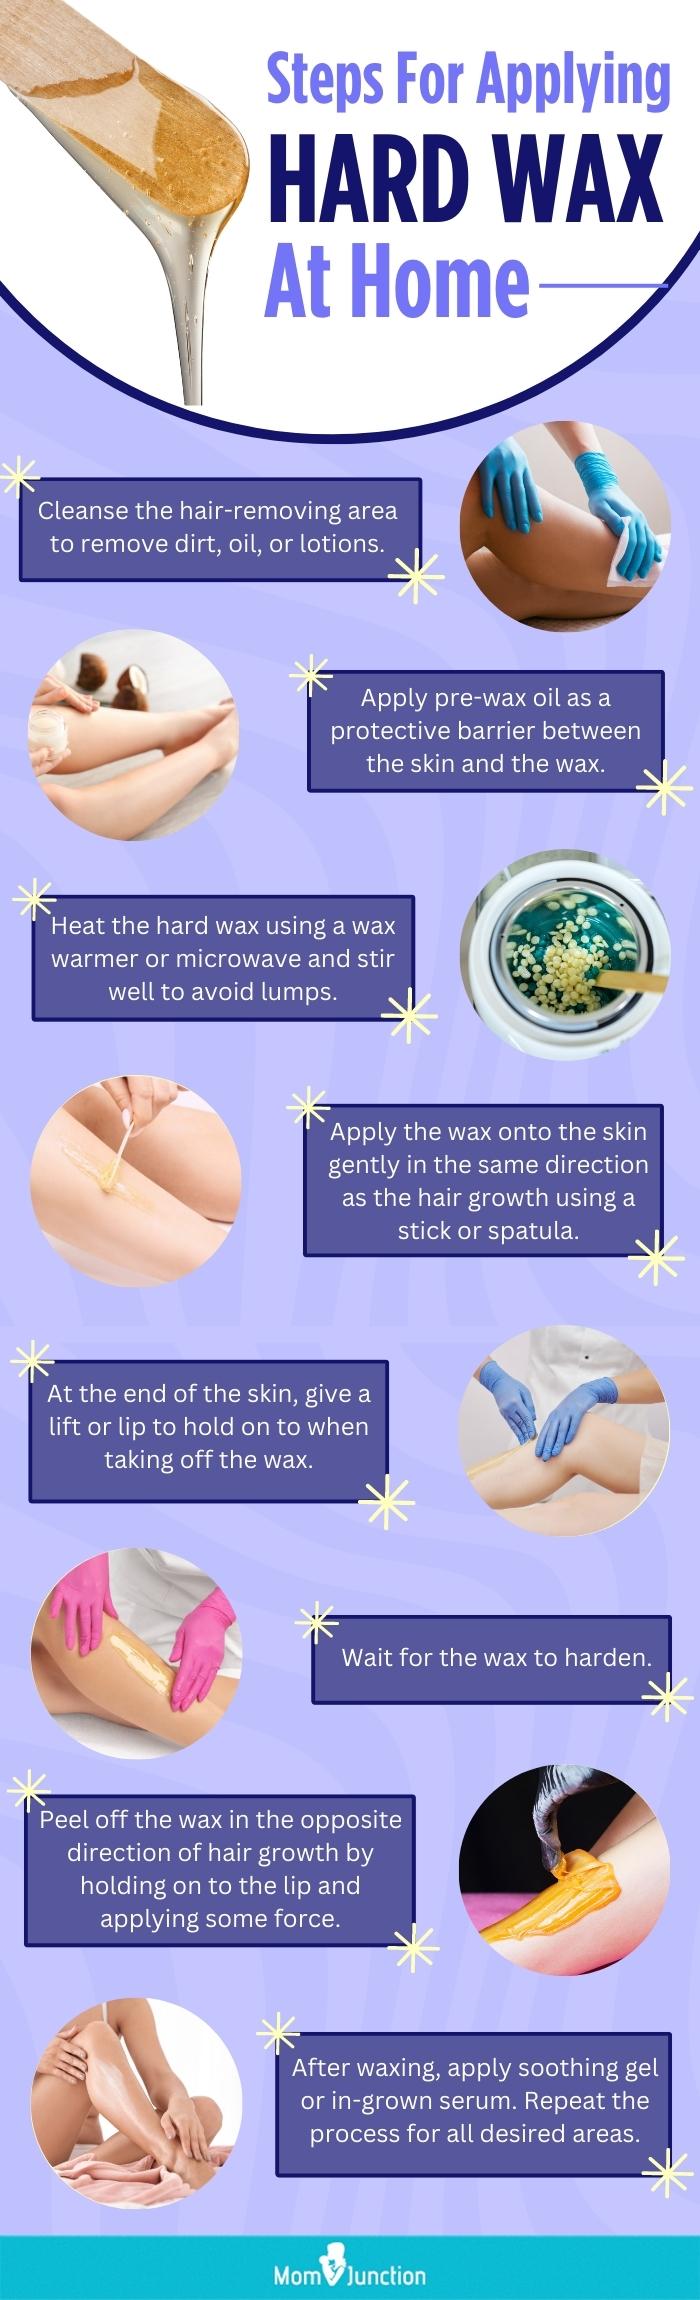 Steps For The Application Of Hard Wax At Home (infographic)